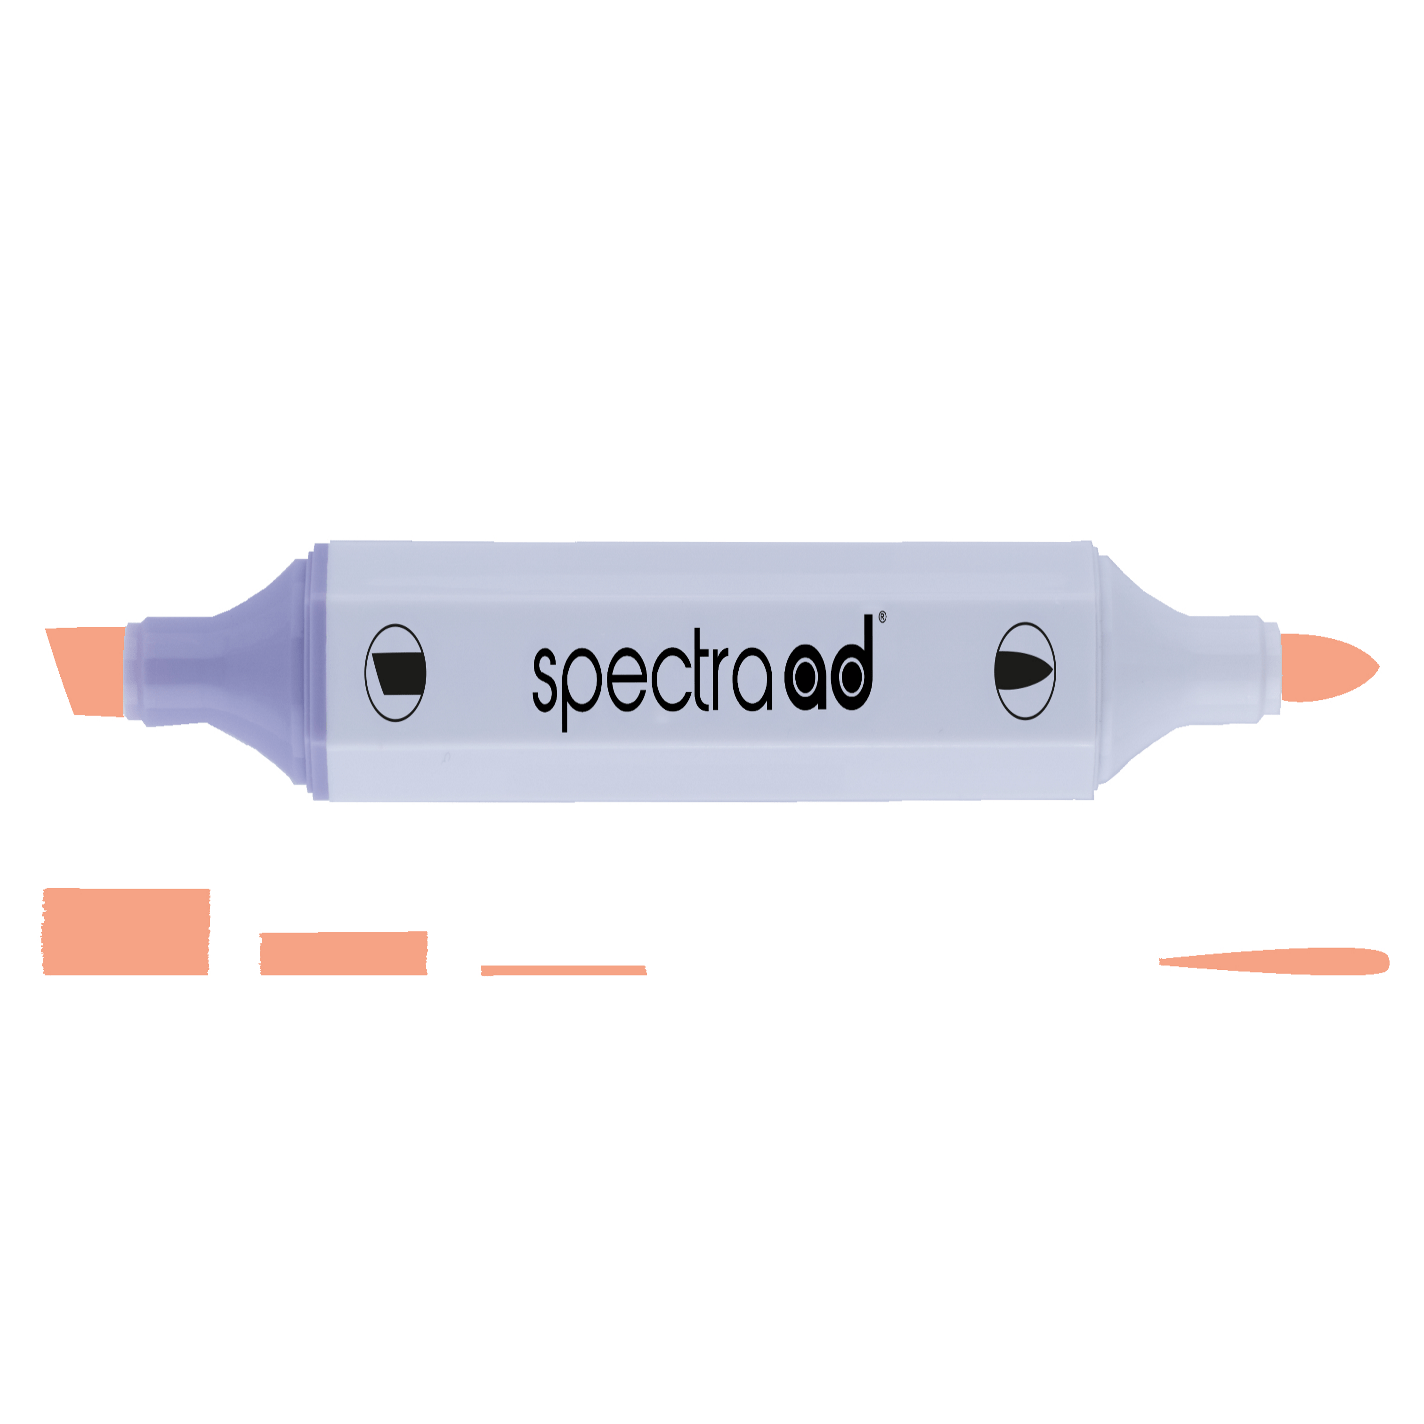 AD Marker Spectra Salmon Pink